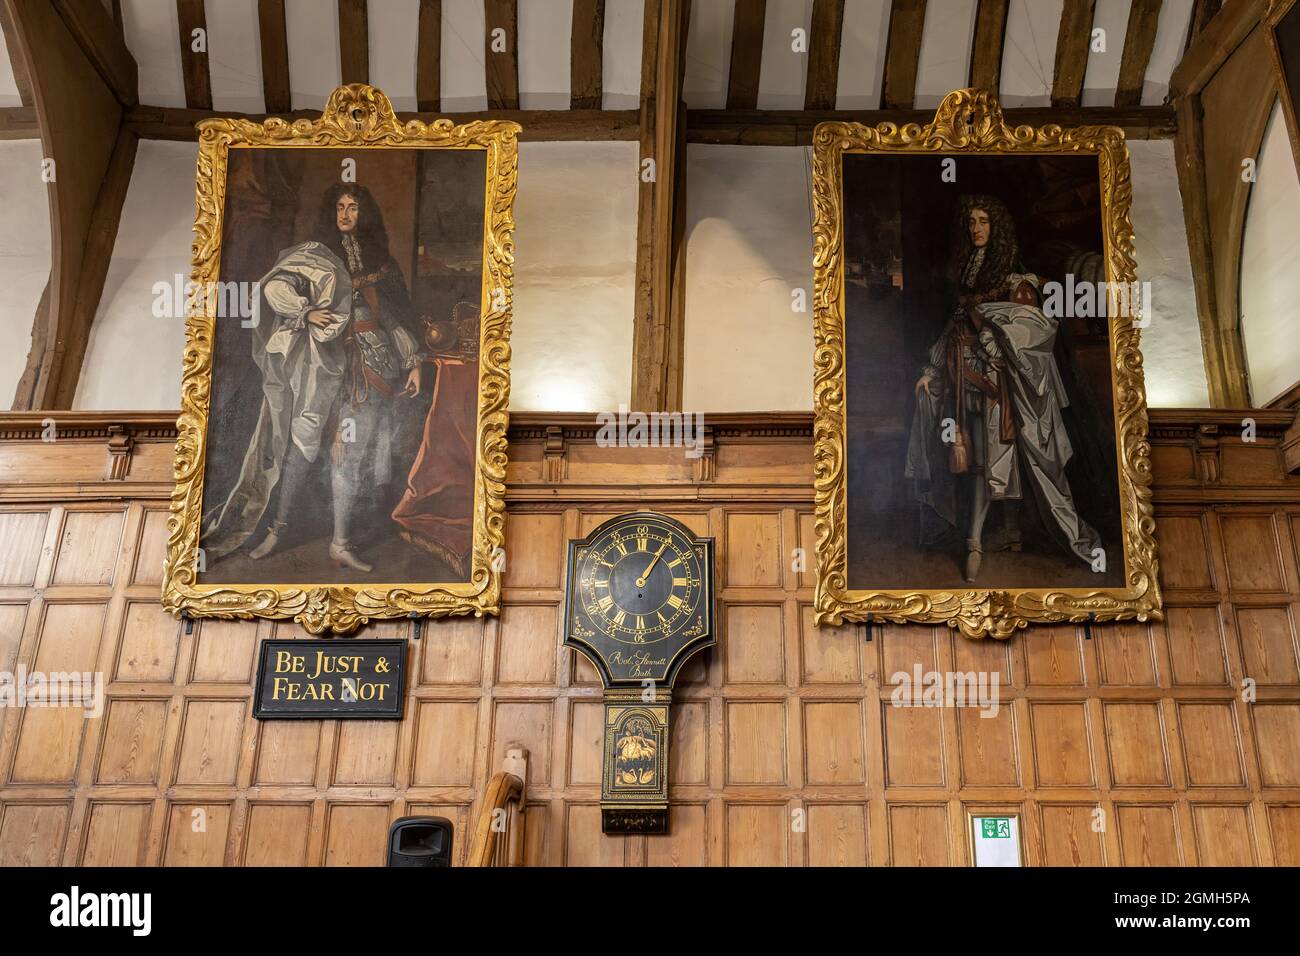 Interior of the Guildhall in Guildford, Surrey, England, UK. The Tudor ground floor with wood panelling, historic portrait paintings and clock. Stock Photo